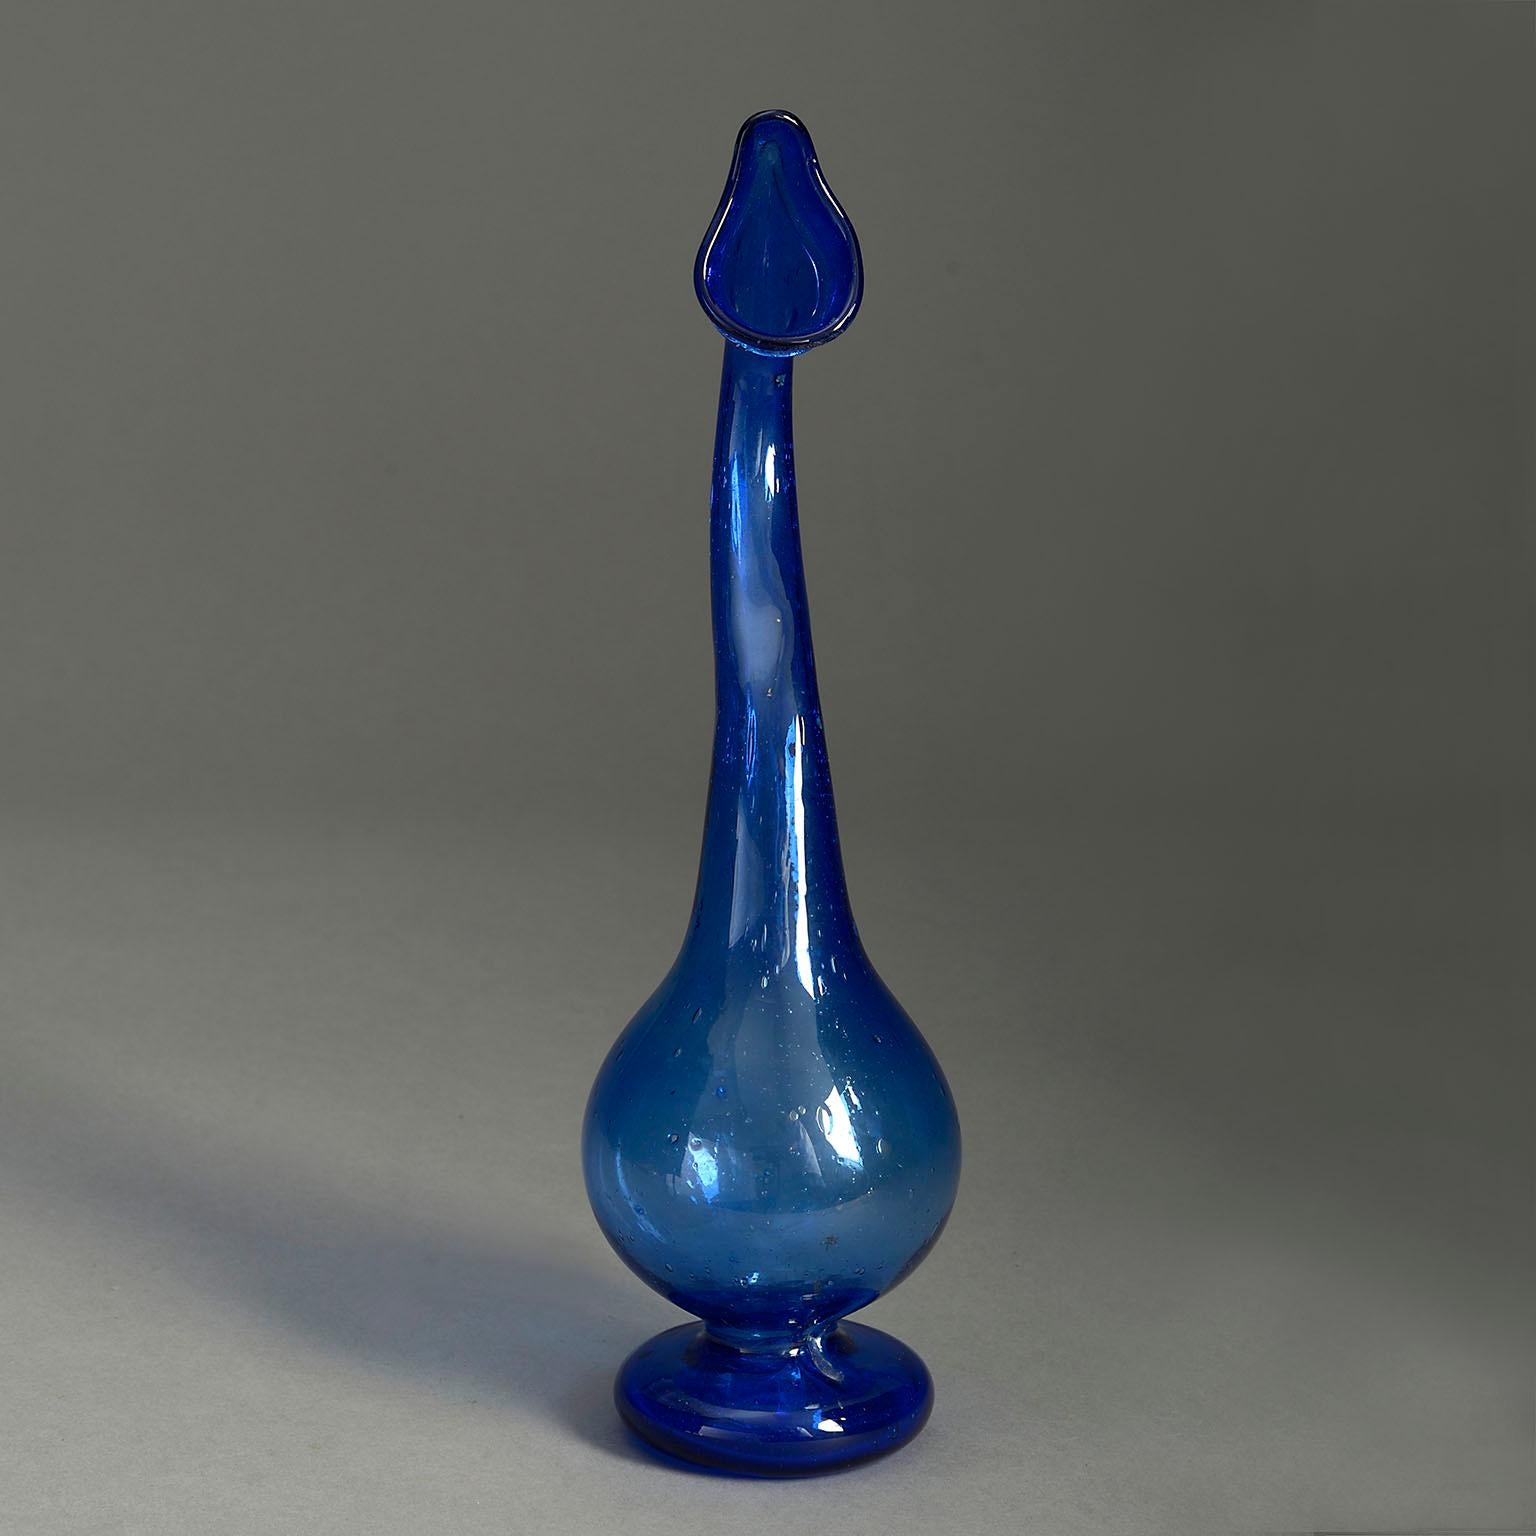 An early 20th century Art Nouveau blue glass vase of organic form, the shaped neck above a bulbous base with circular foot.

